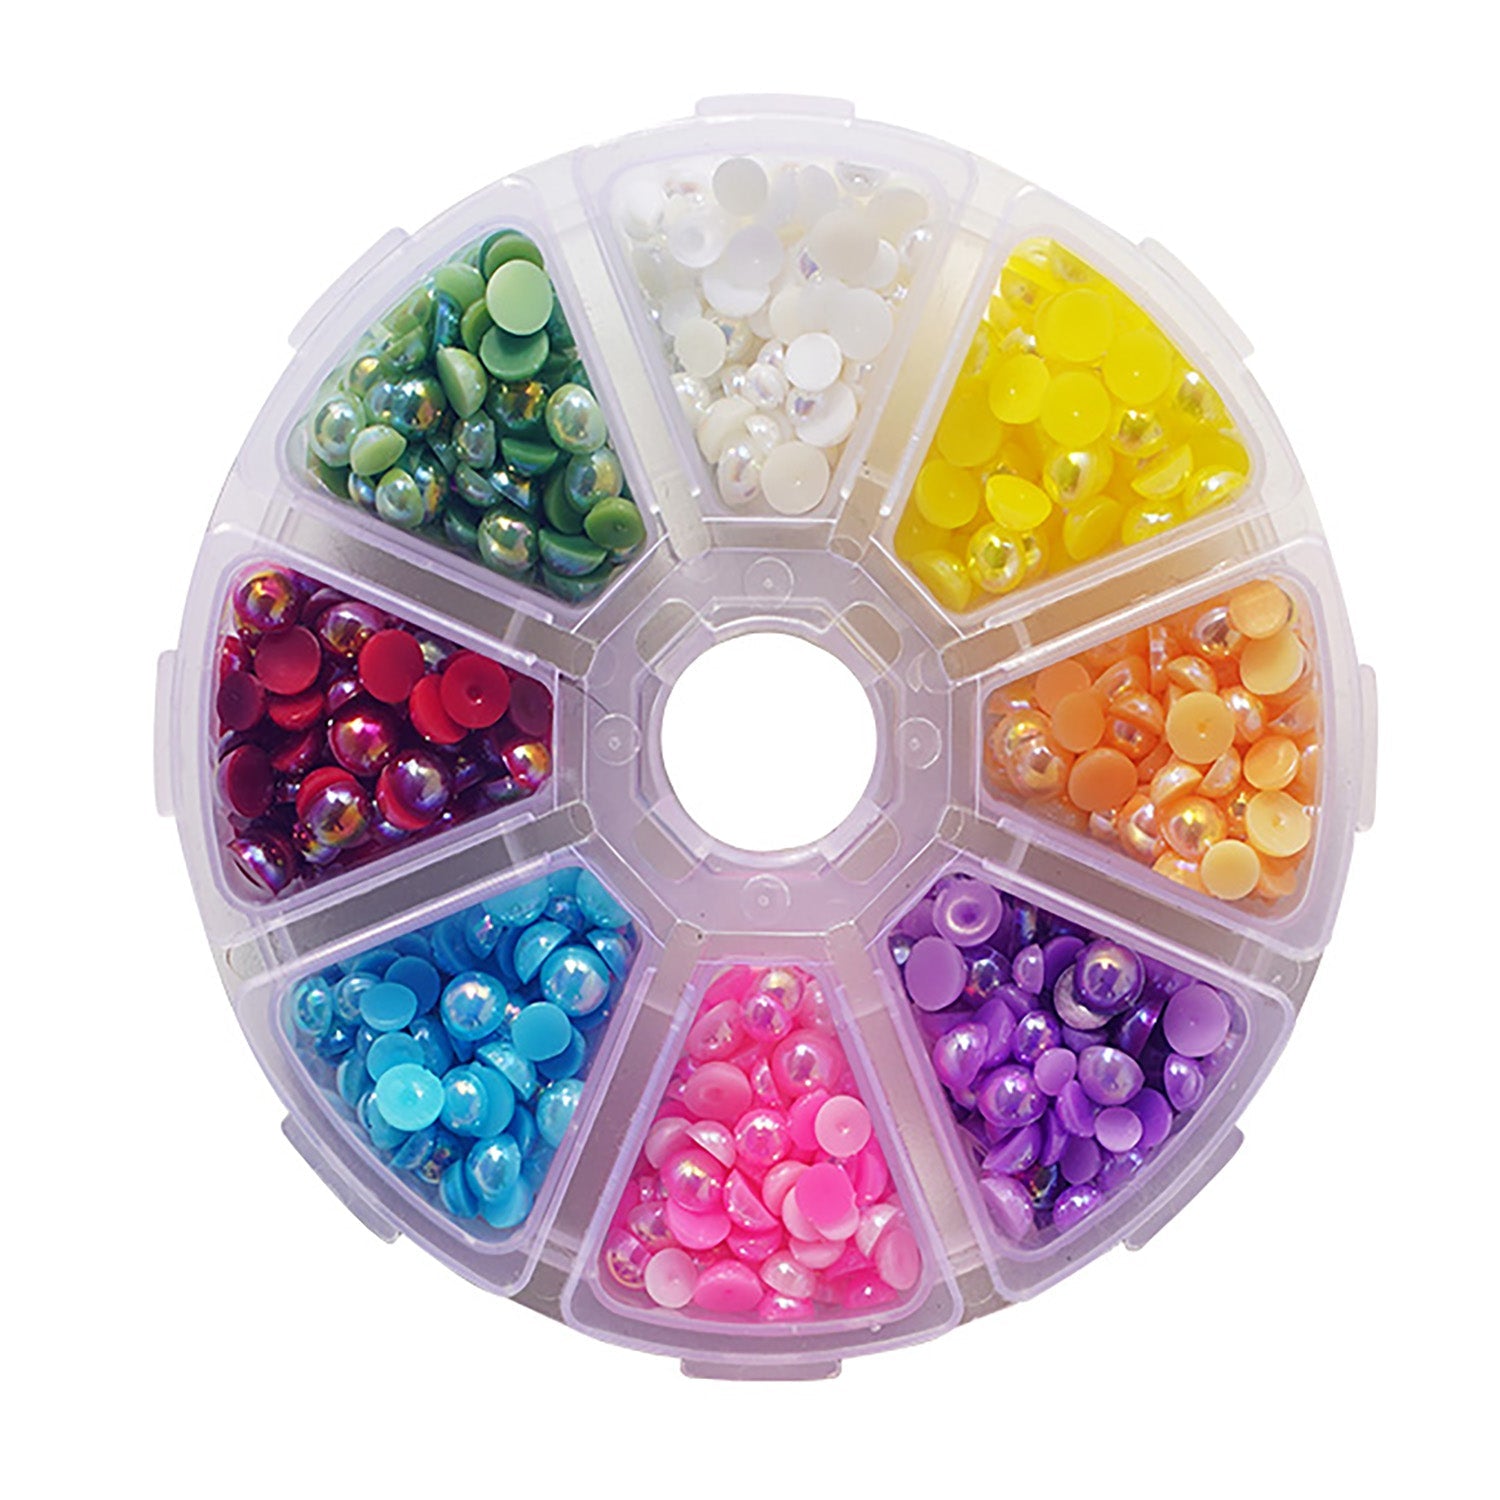 Buttons Galore and More Assorted Half Pearls - 12 Colors